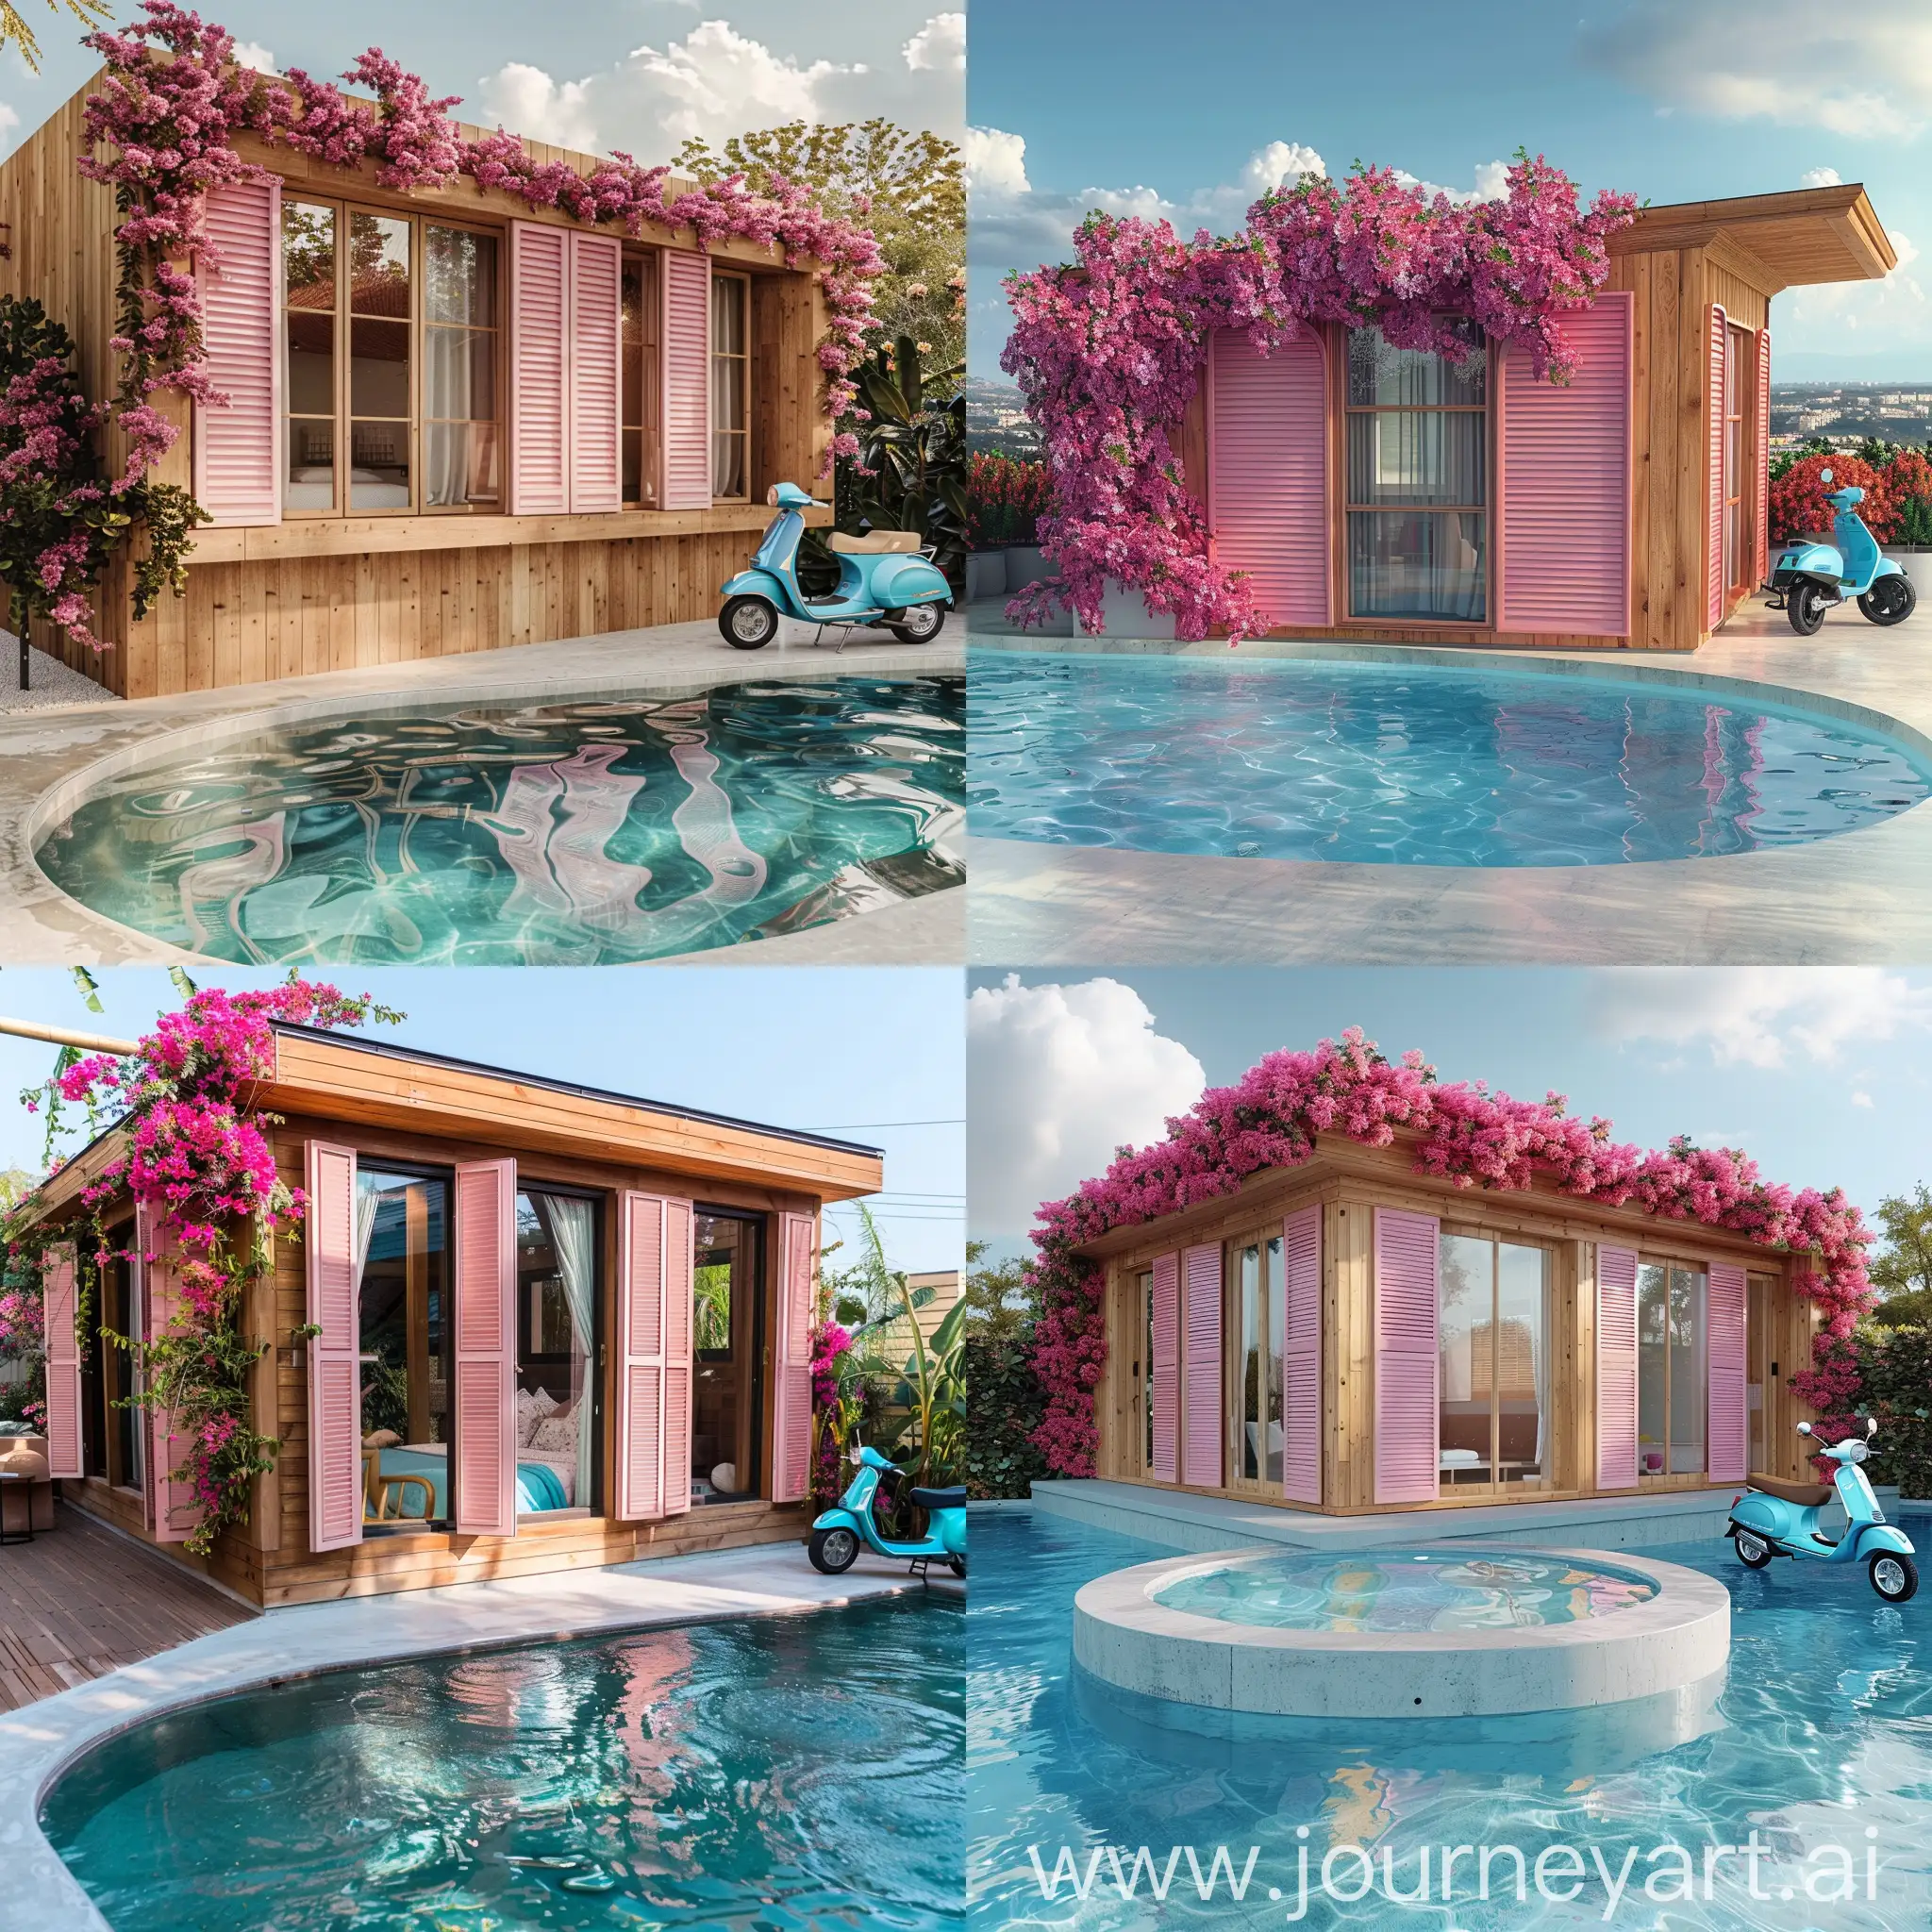 Modern-Wooden-Cottage-with-Pink-Shutters-and-Poolside-Vespa